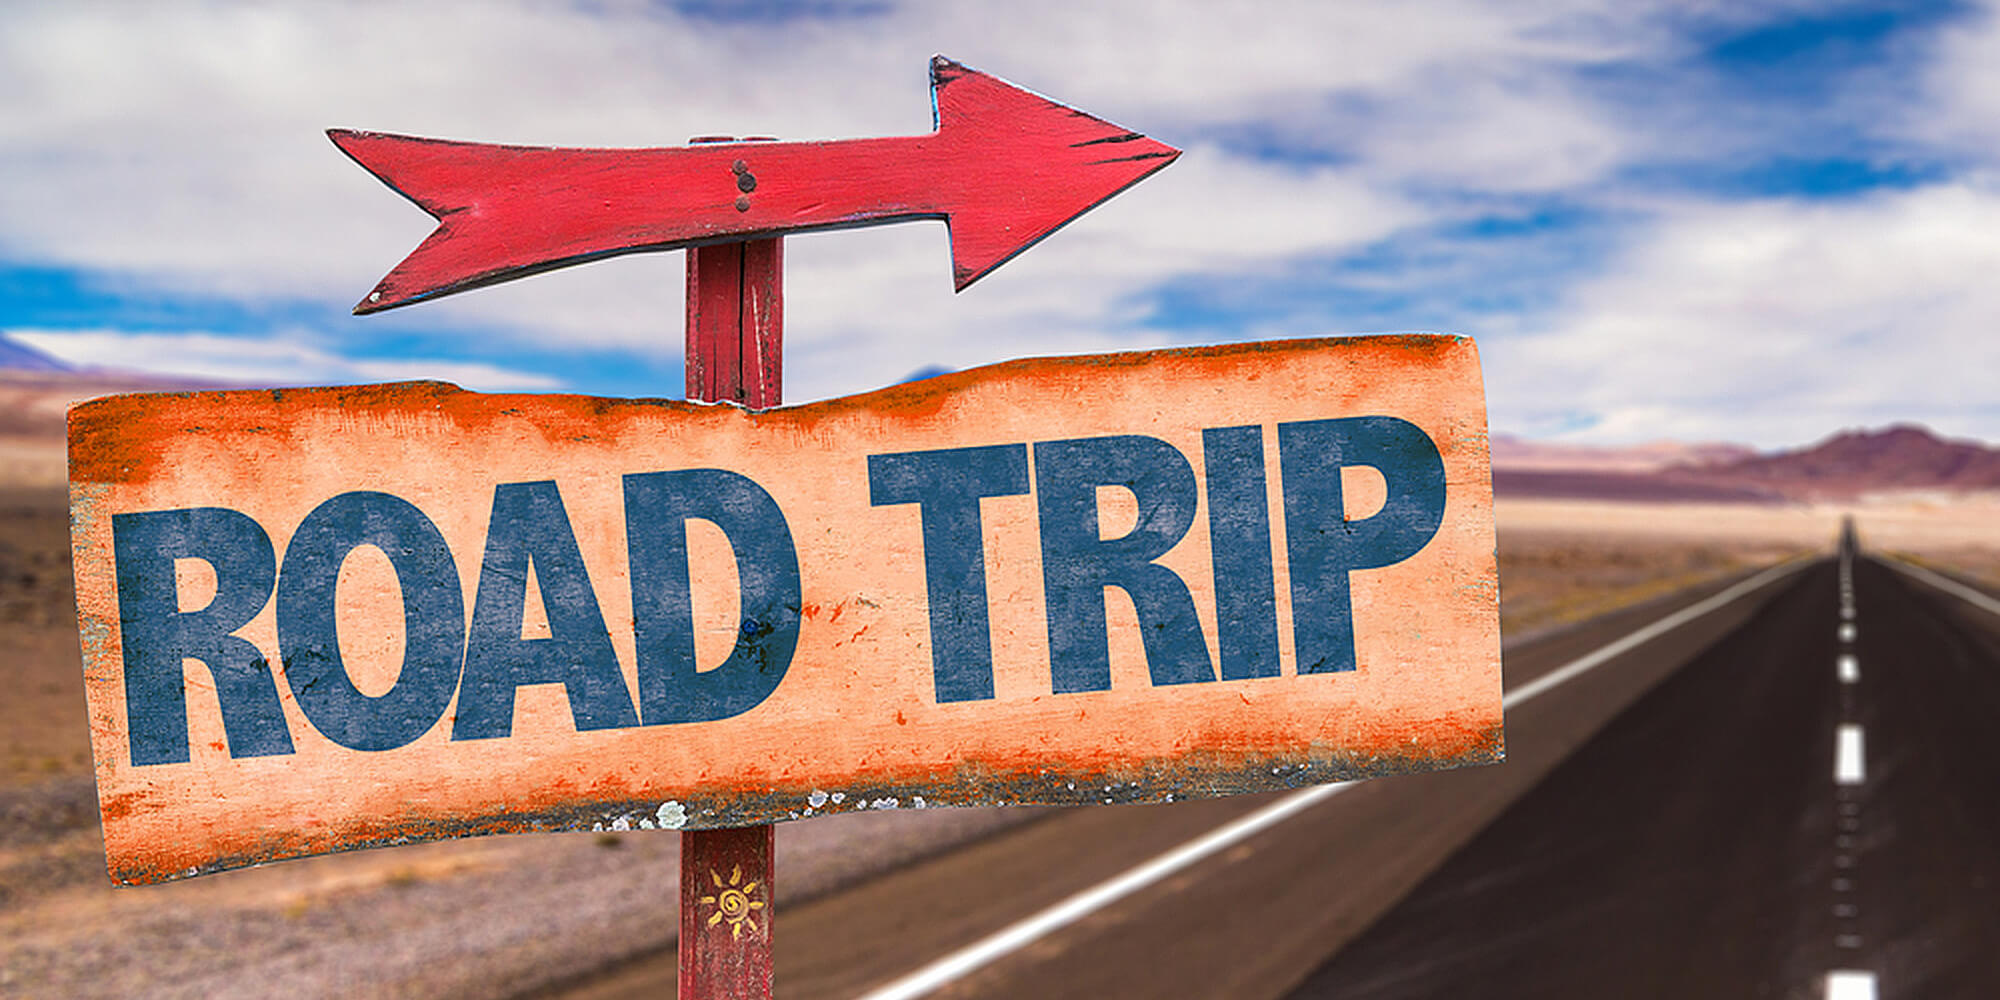 Hidden Secrets to Save $ While on a Road Trip - Quirk Cars